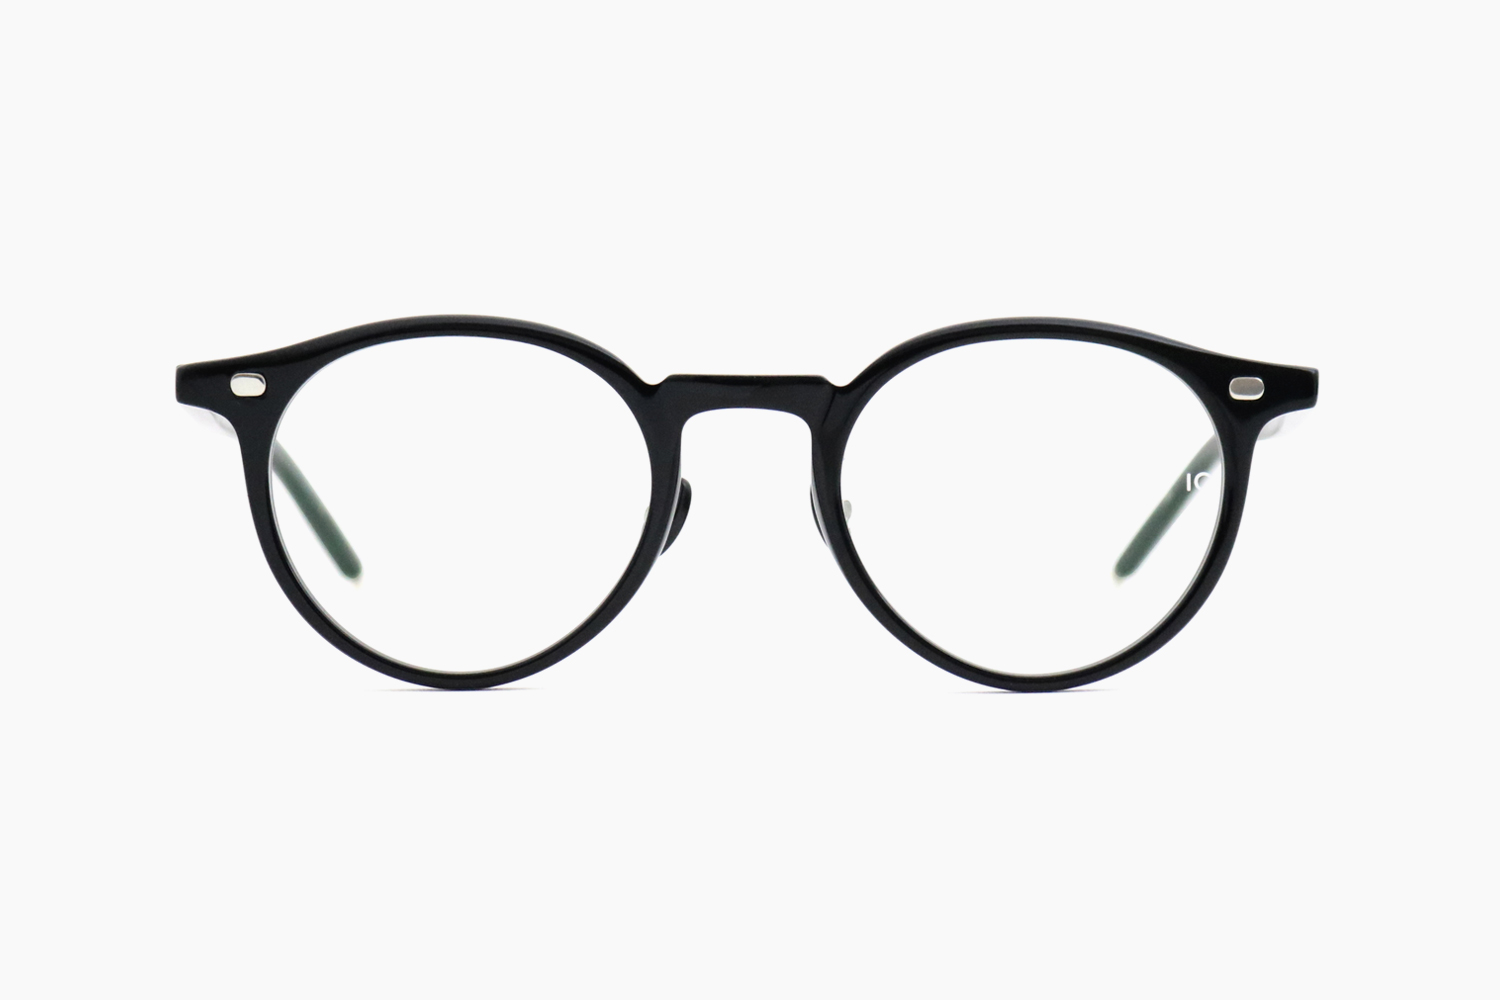 10 eyevan｜no3-Ⅲ - 1002S｜PRODUCT｜Continuer Inc.｜メガネ